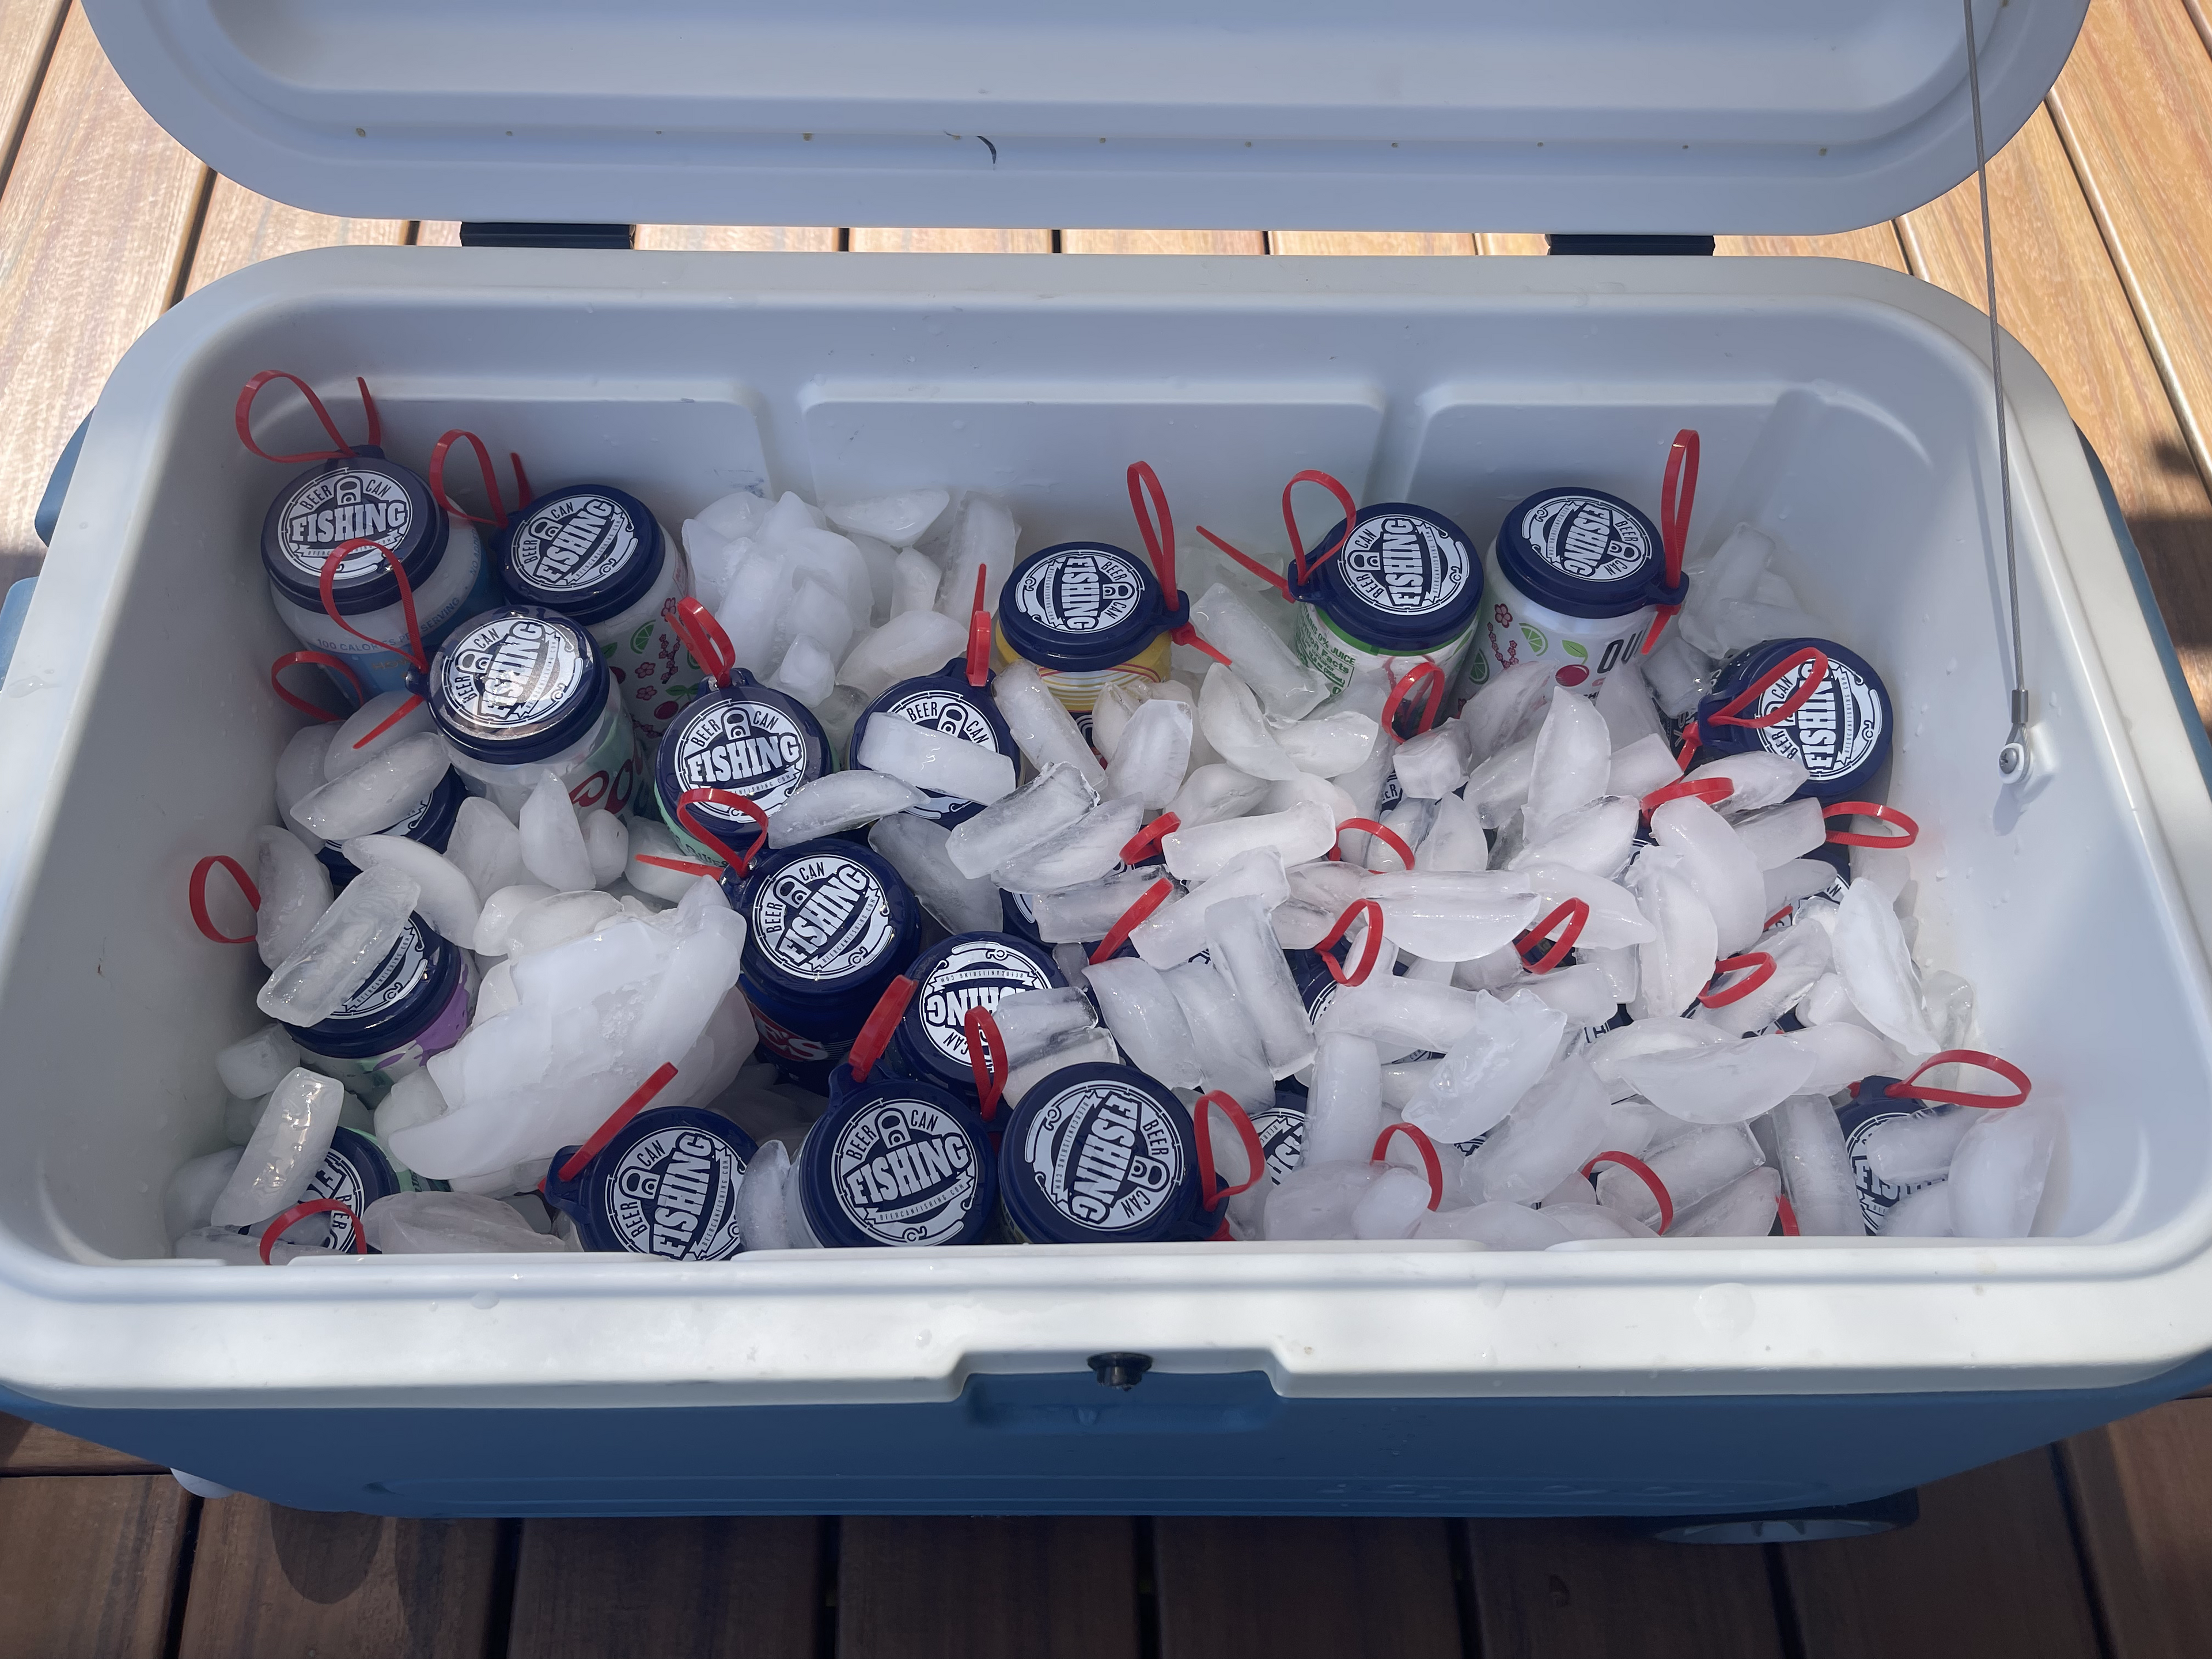 30 pack of beer can fishing game lids in a cooler